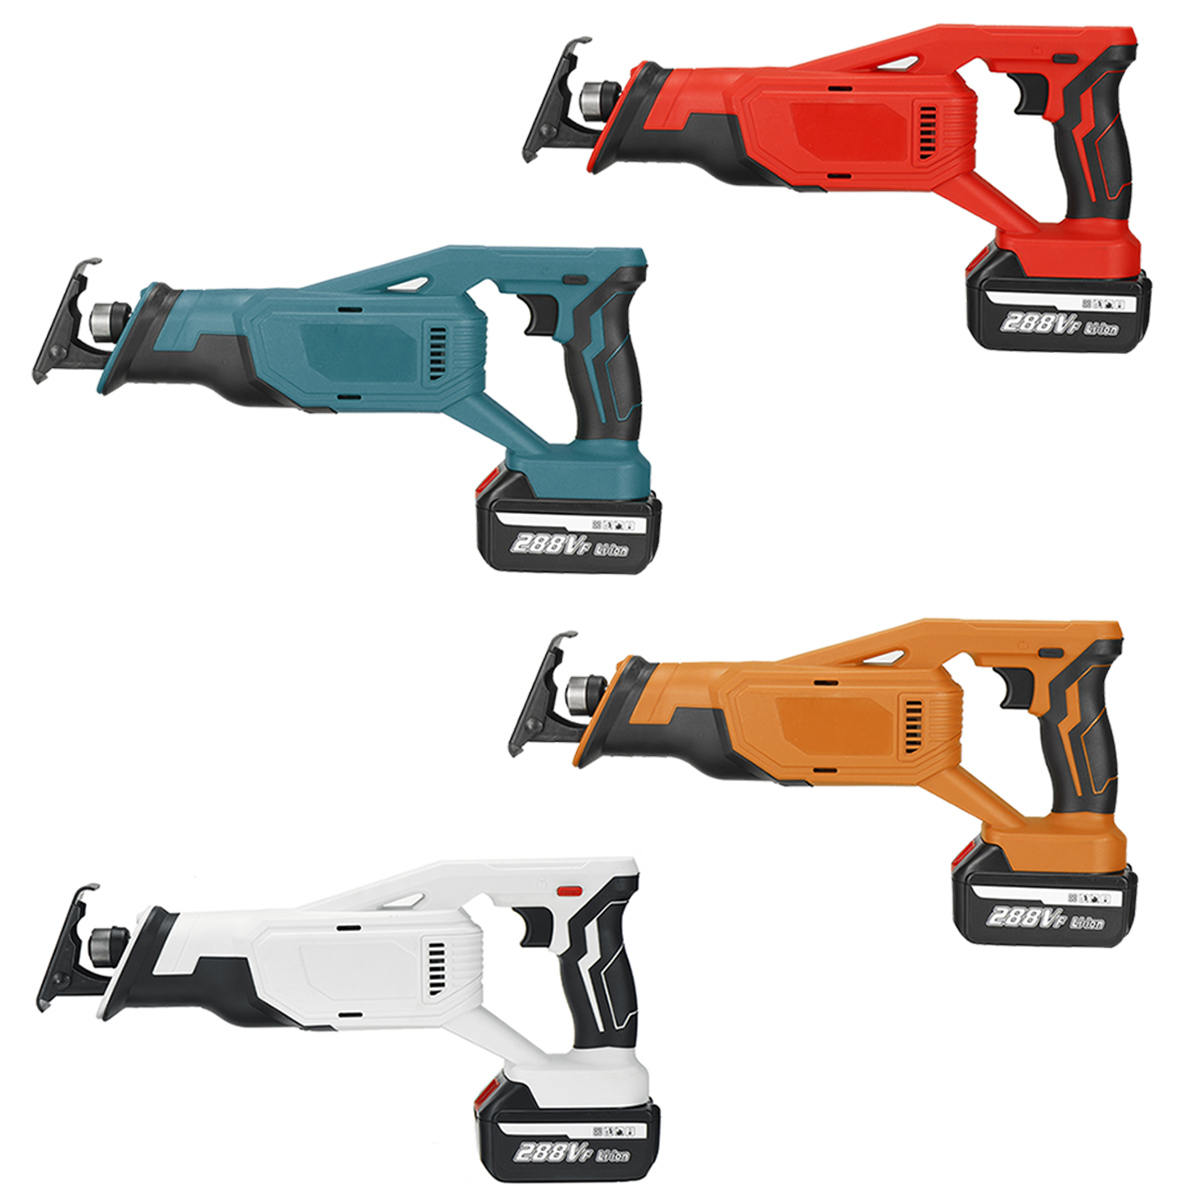 288VF-Cordless-Reciprocating-Saw-Rechargeable-Electric-Recip-Sabre-Saw-W-4pcs-Blade--2pcs-Battery-Wo-1868930-11